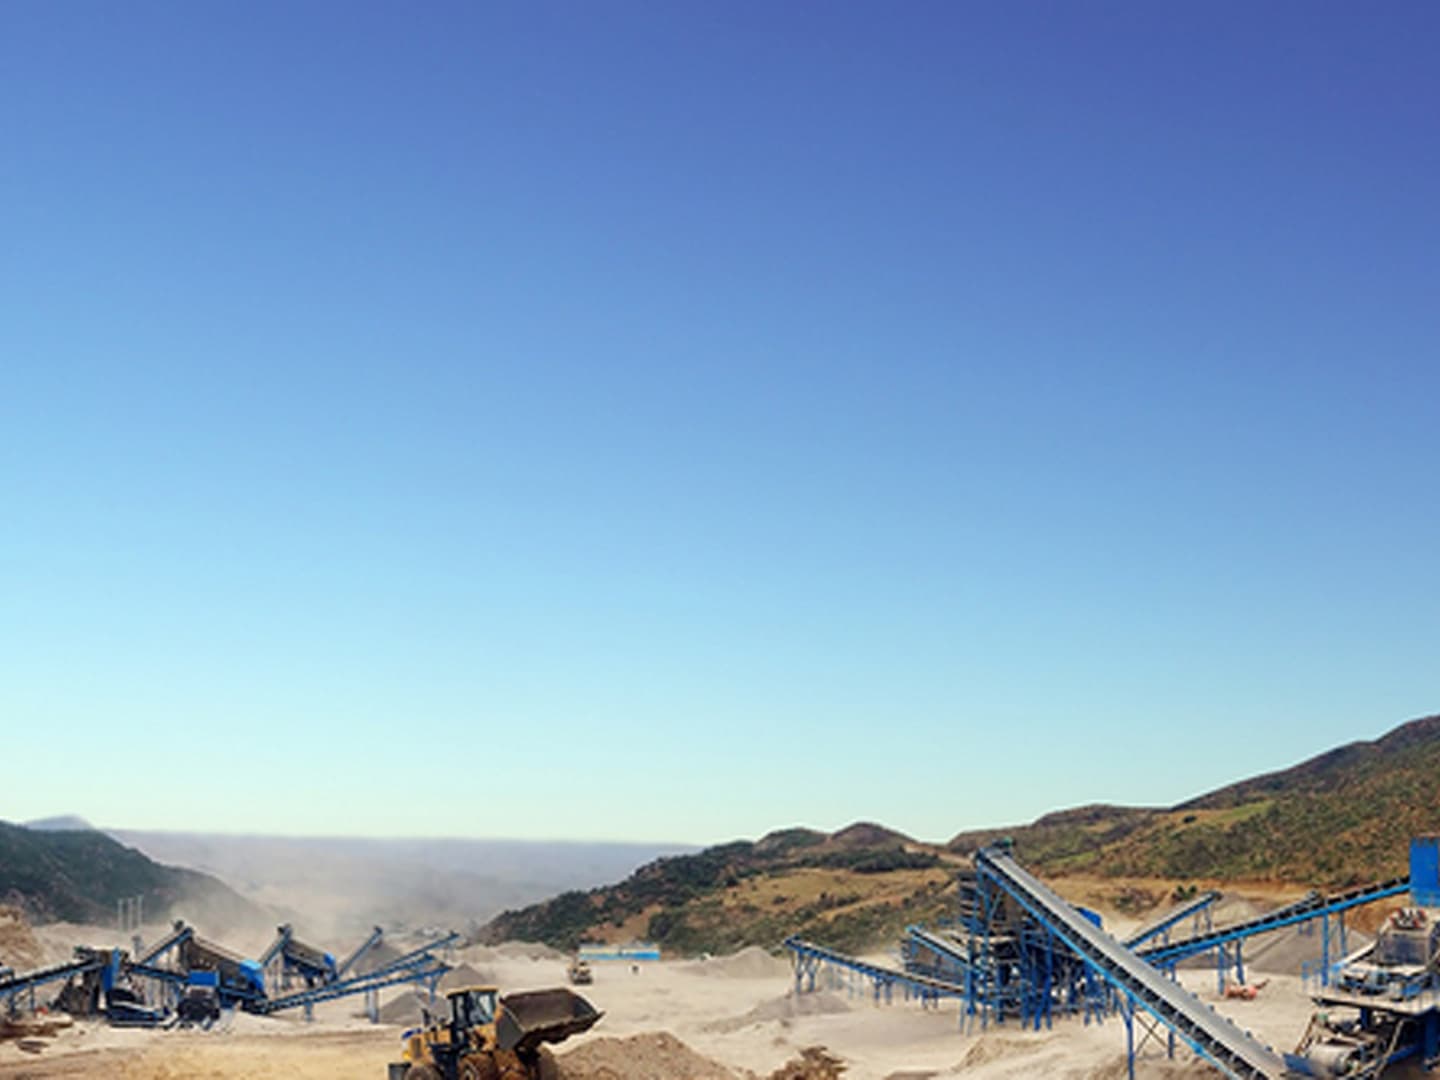 How to select suitable beneficiation process and reduce beneficiation cost according to ore characteristics?